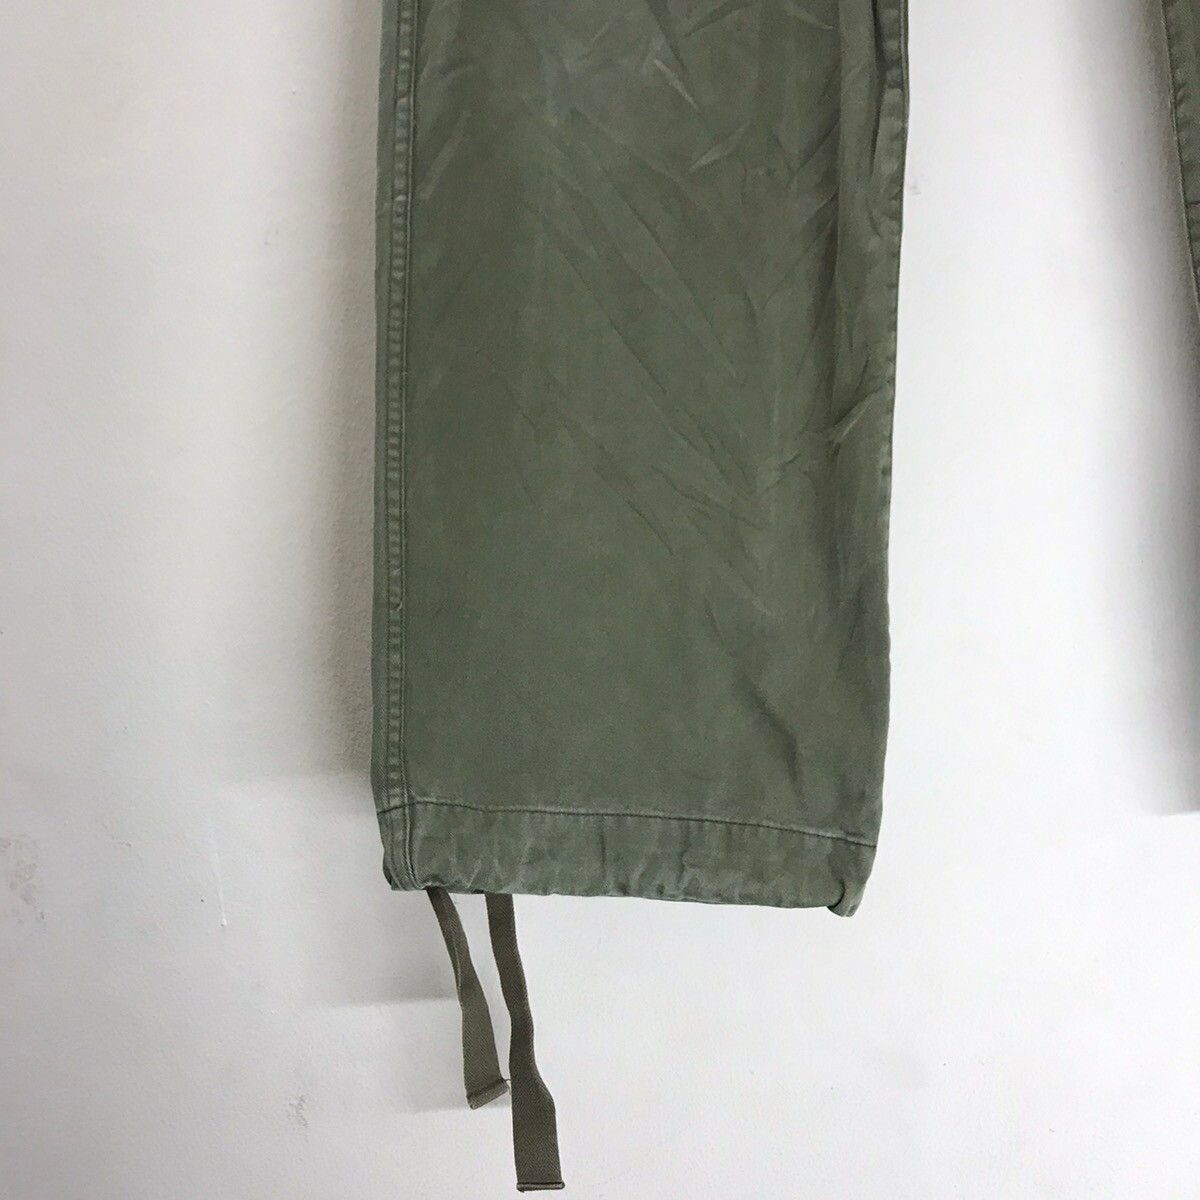 Margaret Howell MHL by Margaret Howell Cargo Pants Funtion And Utility Size US 34 / EU 50 - 4 Thumbnail